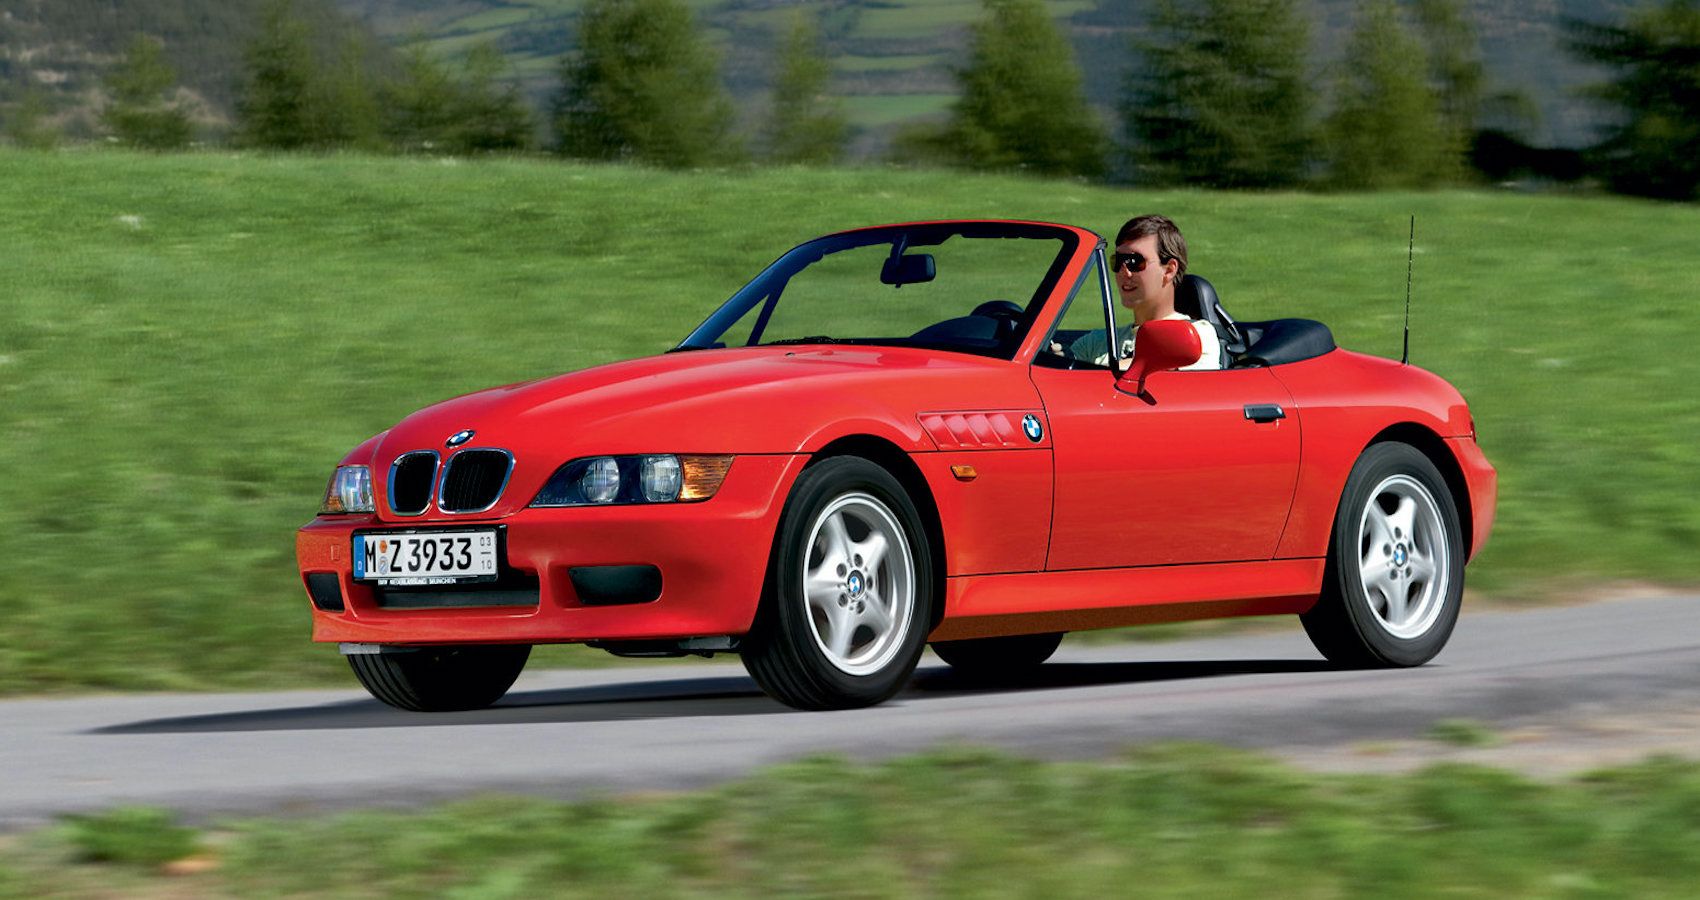 Red BMW Z3 sports car driving